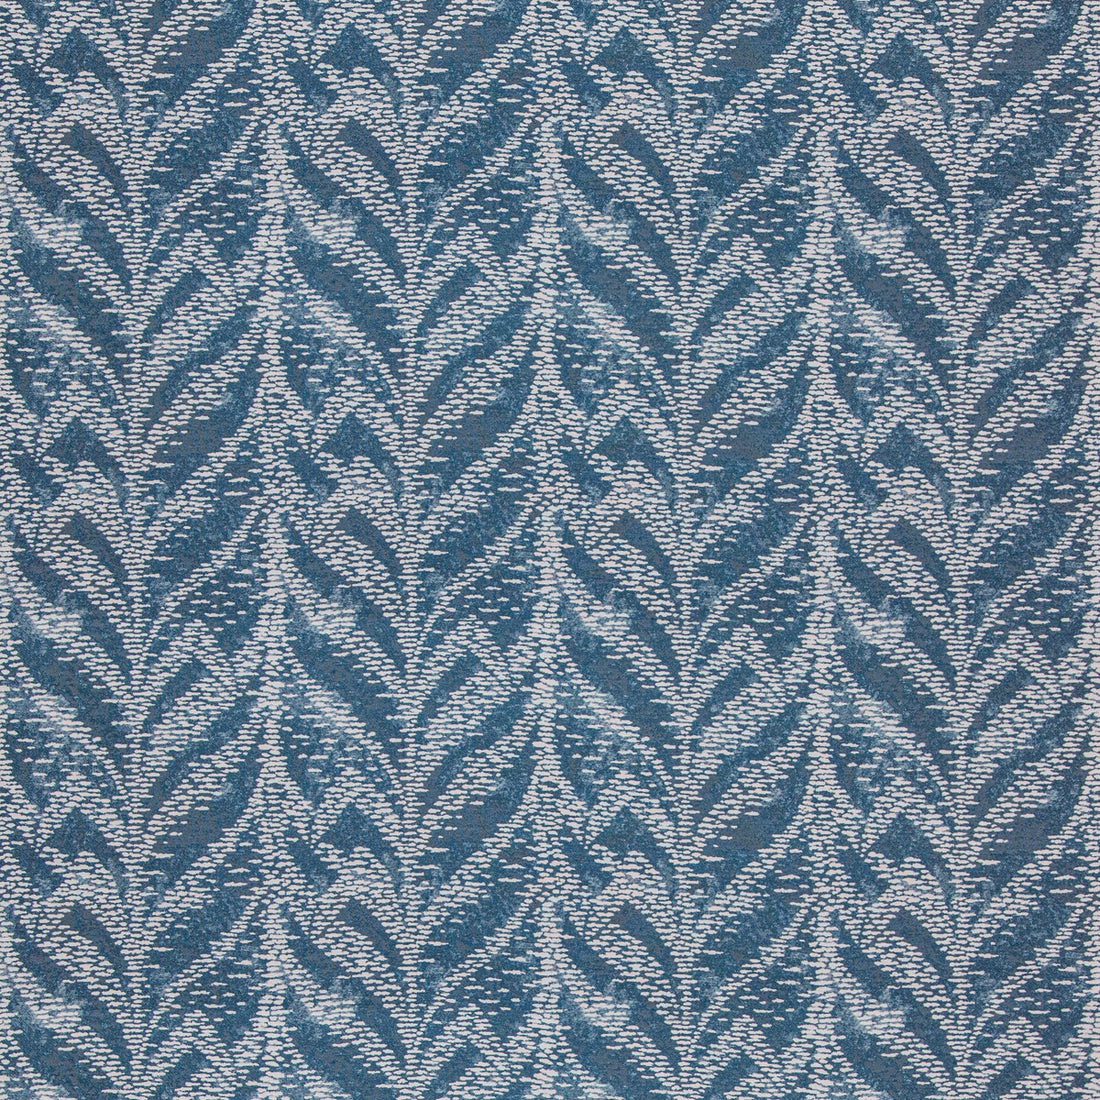 Pompano fabric in marine color - pattern 35818.5.0 - by Kravet Design in the Indoor / Outdoor collection